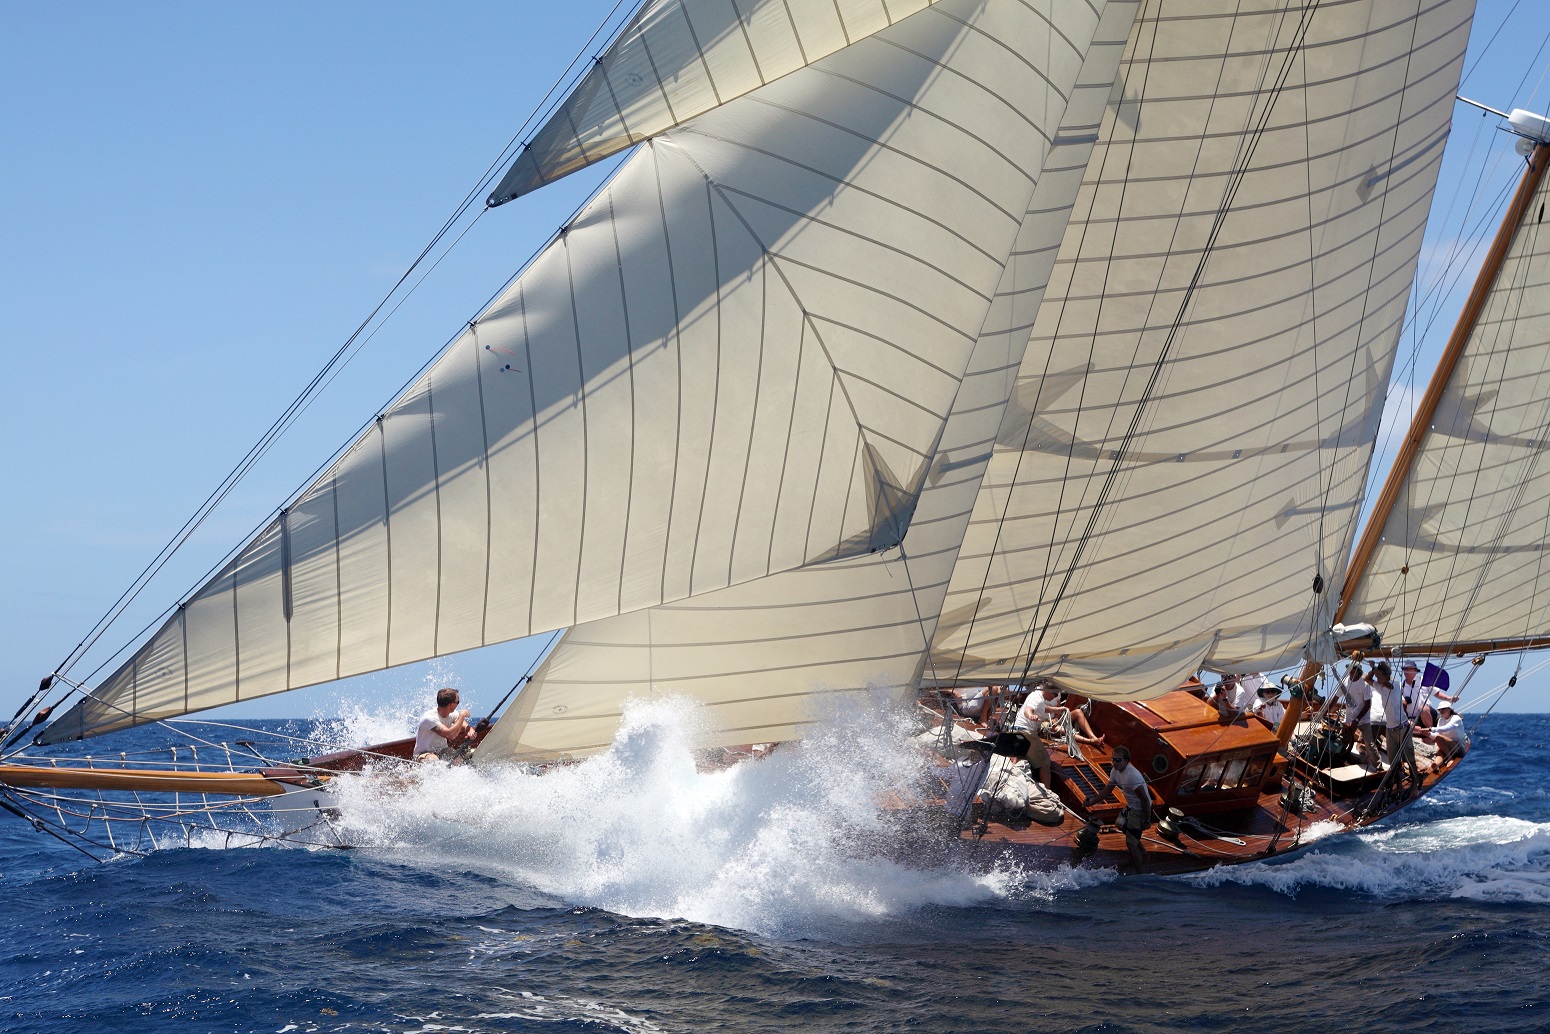 OFFICINE PANERAI CELEBRATES ITS PASSION FOR THE SEA WITH A GREAT PHOTO ...